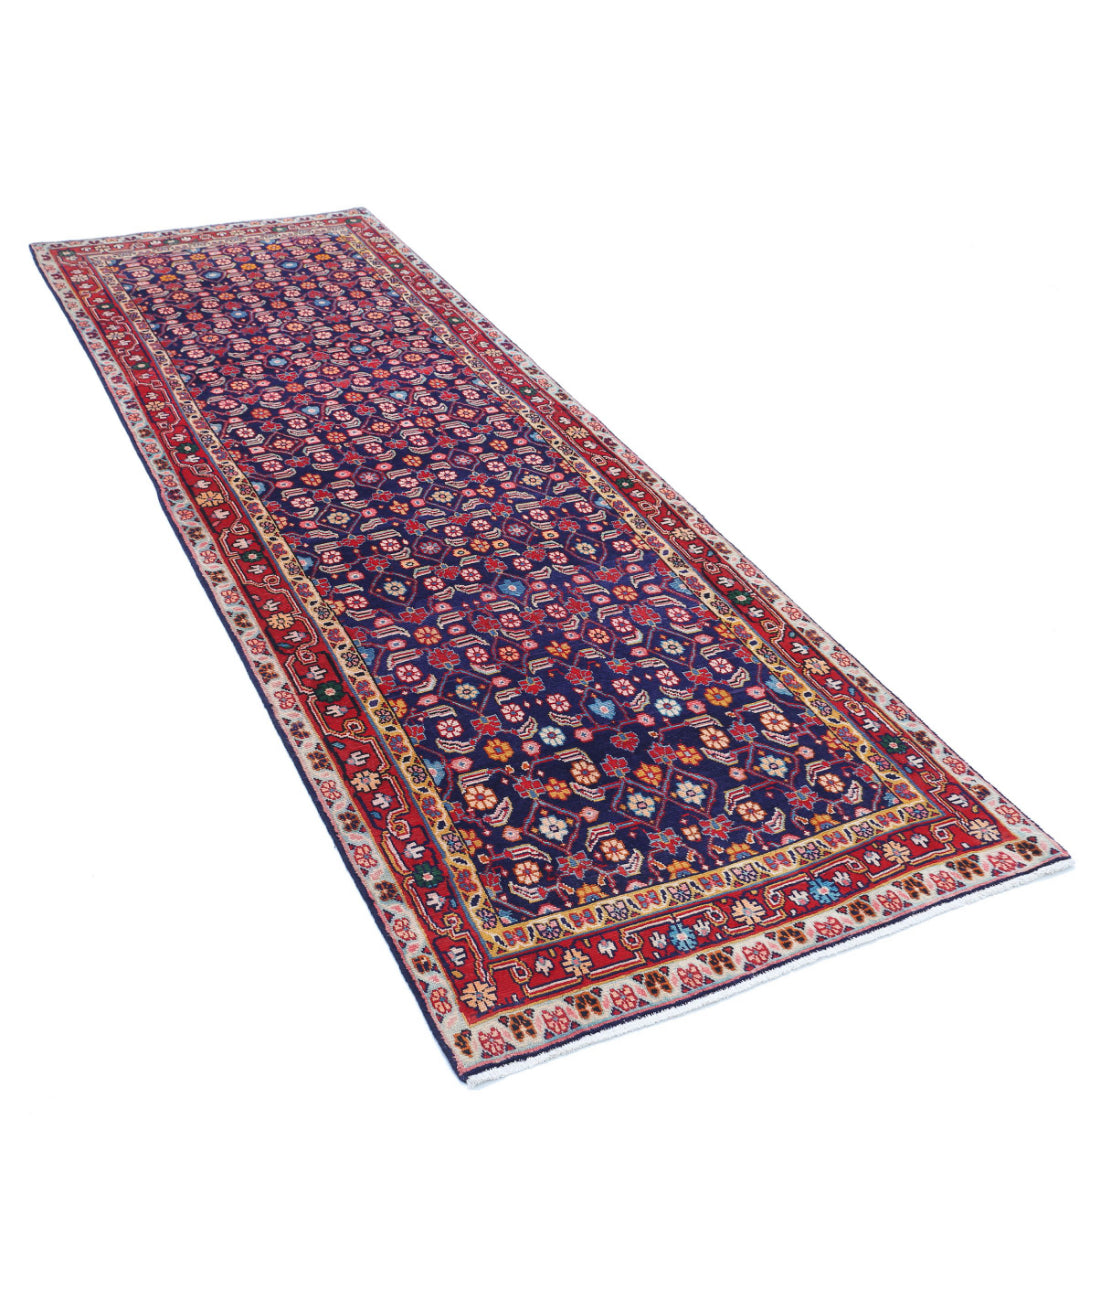 Hand Knotted Persian Hamadan Wool Rug - 3'4'' x 9'9'' 3'4'' x 9'9'' (100 X 293) / Blue / Red